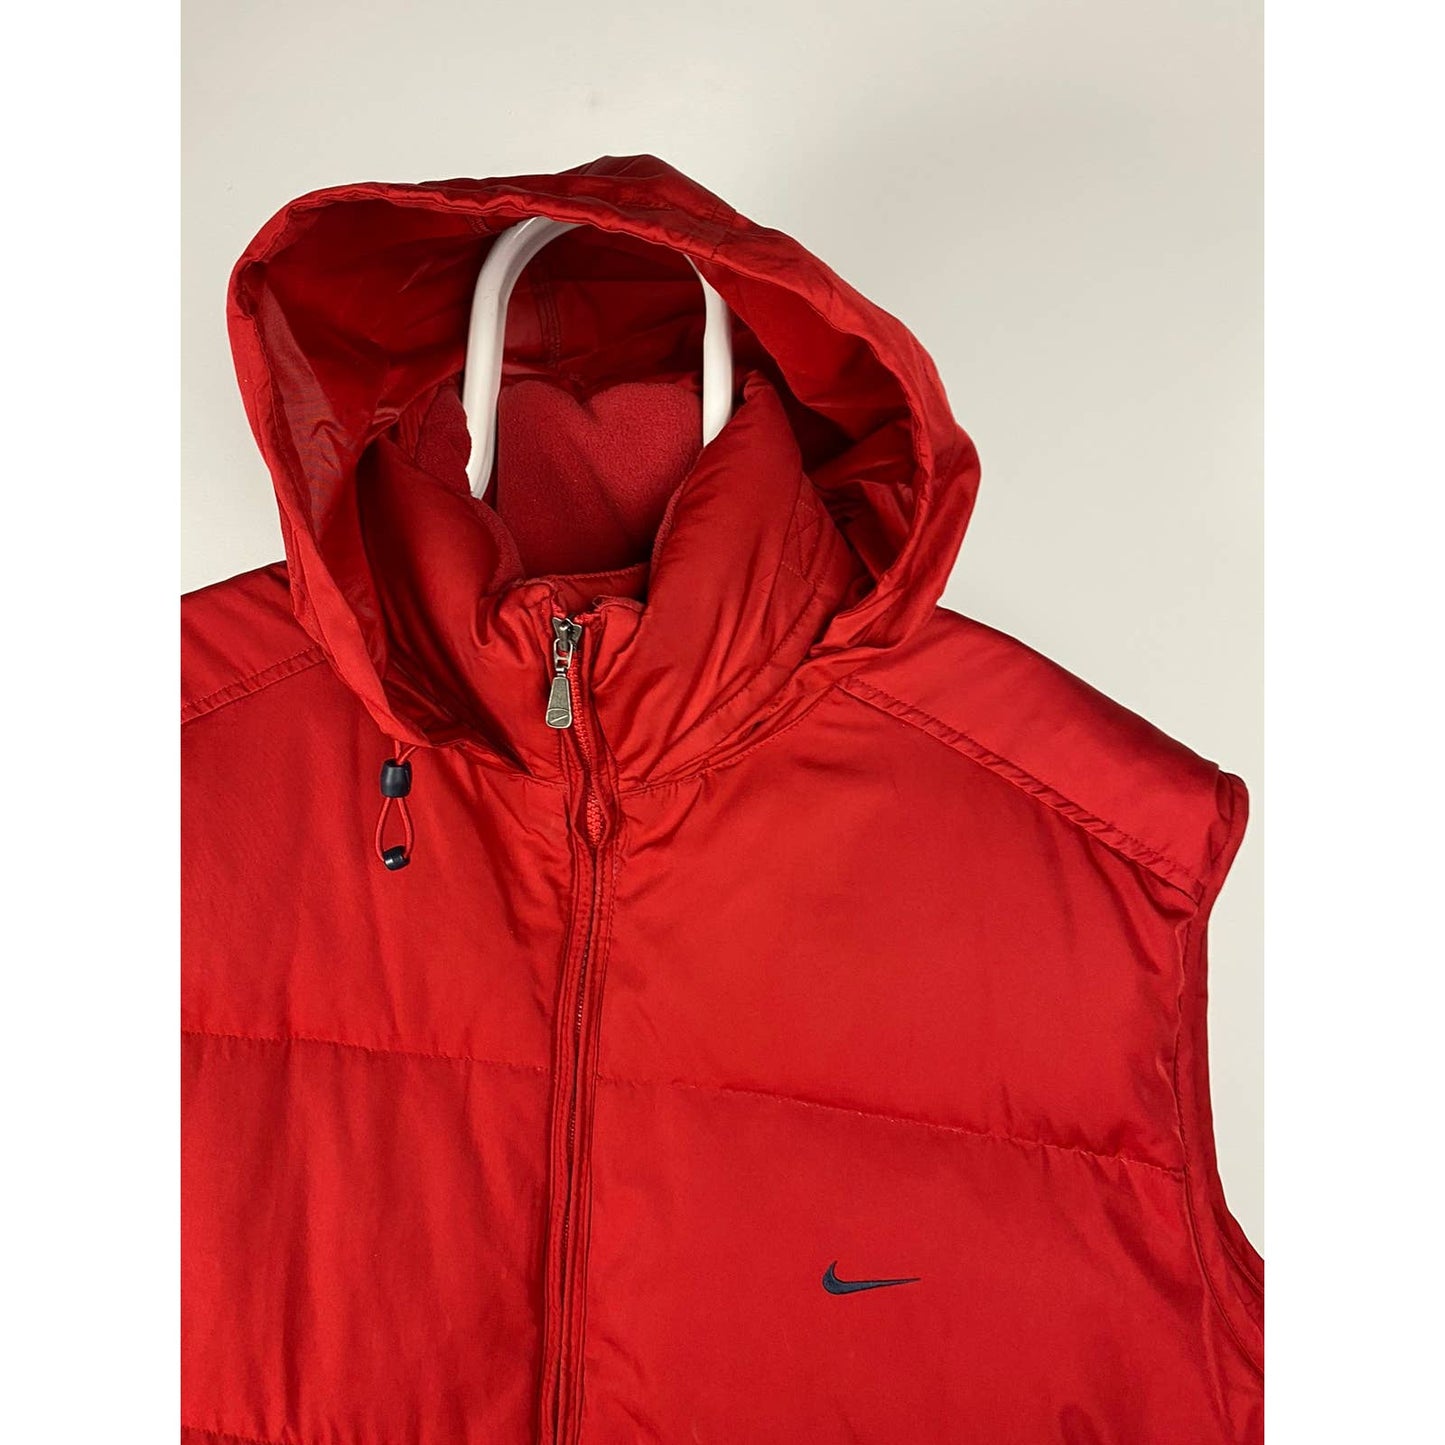 Nike vintage red puffer vest small swoosh duck down 2000s